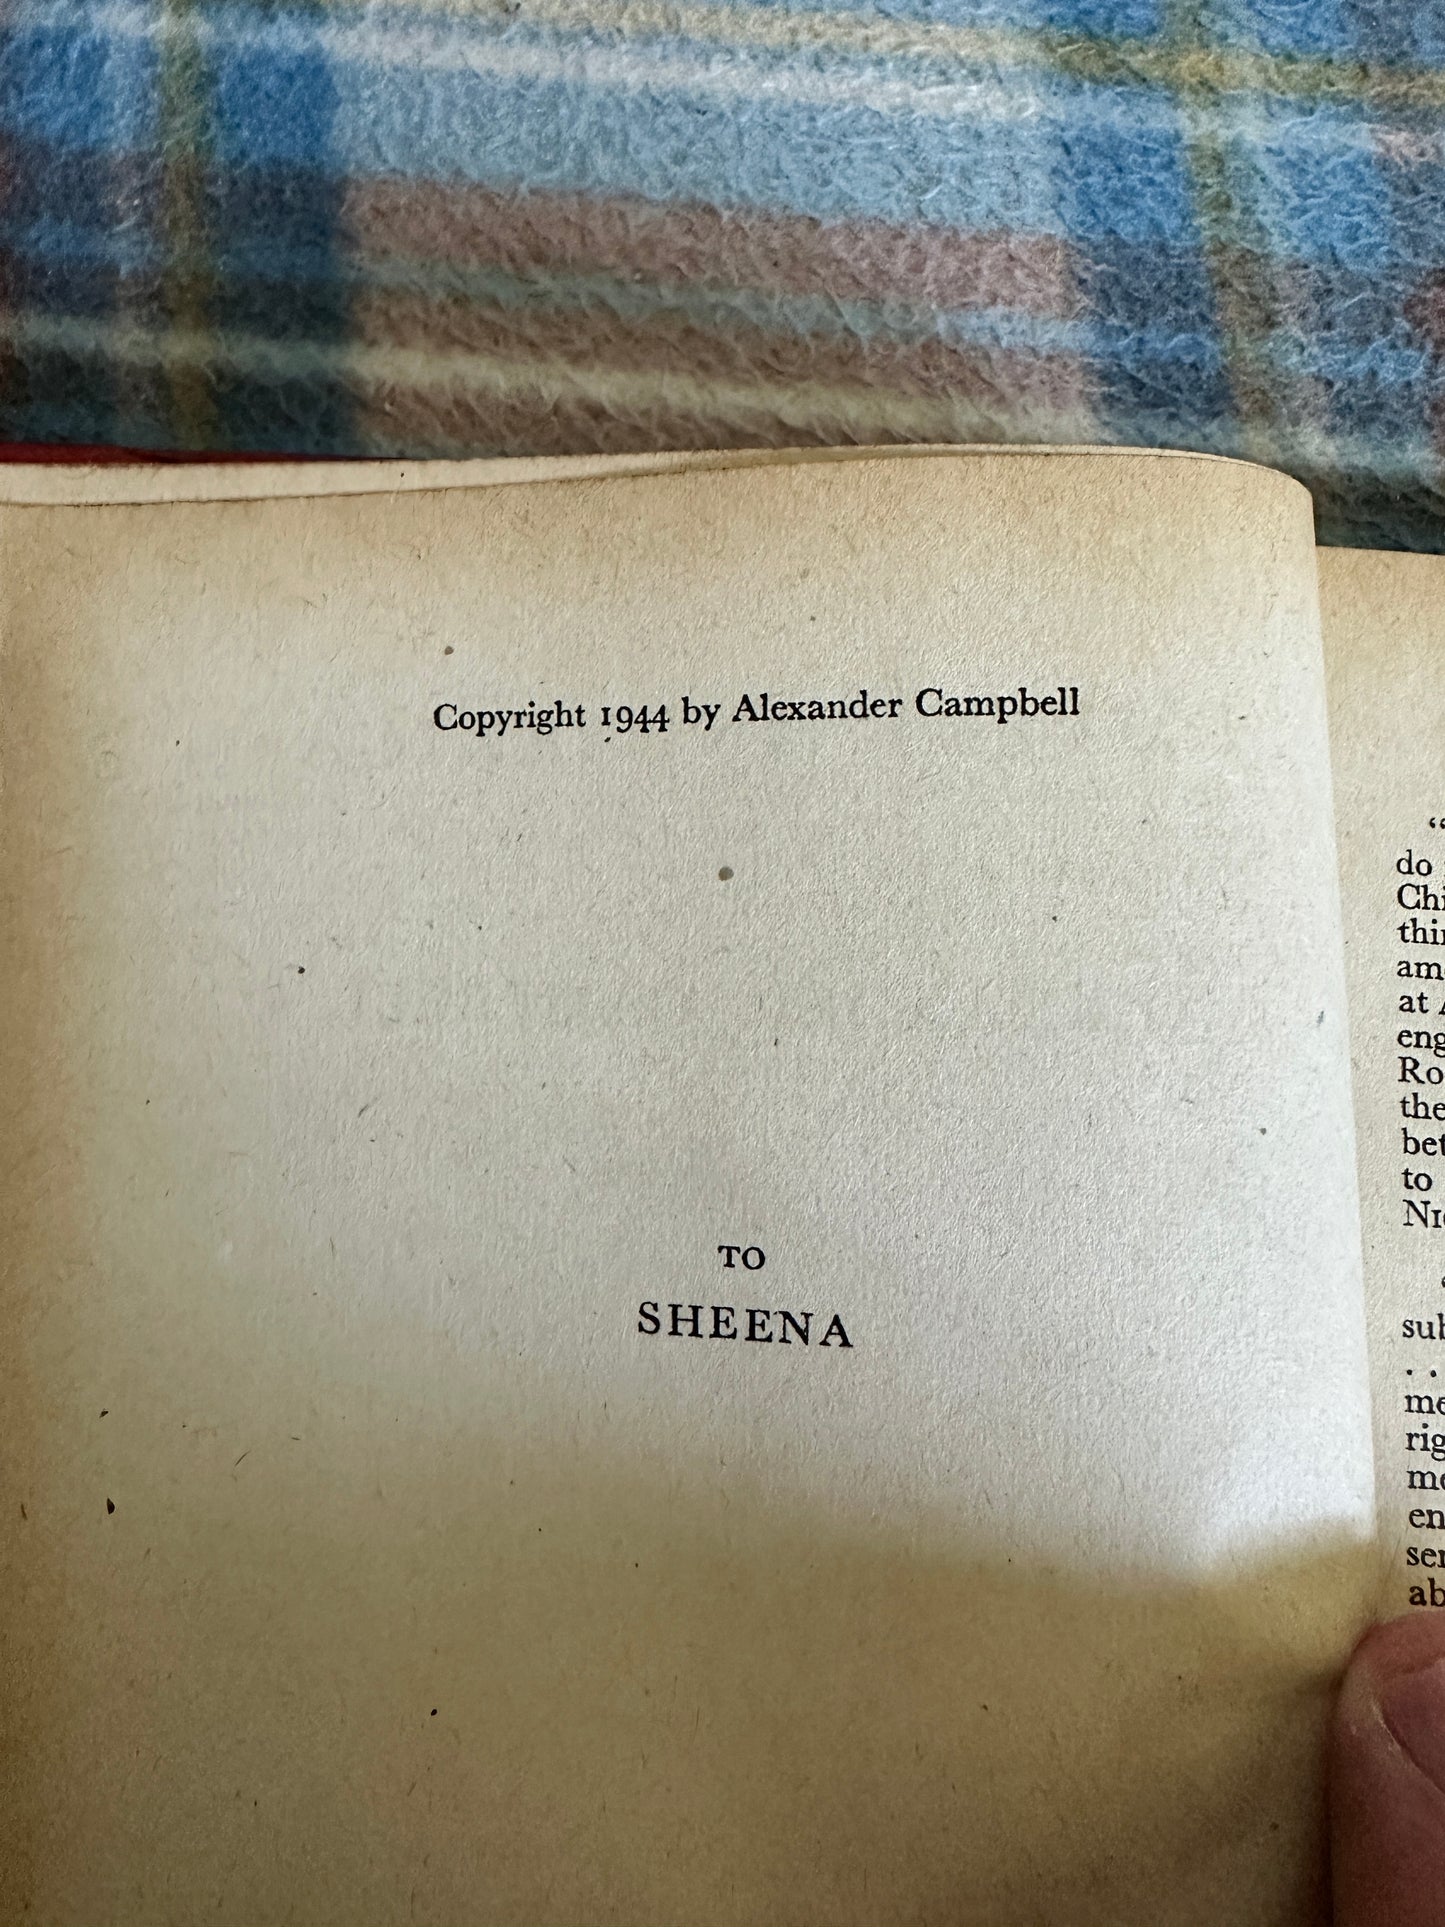 1944*1st* Empire In Africa - Alexander Campbell(Victor Gollancz) Left Book Club Edition